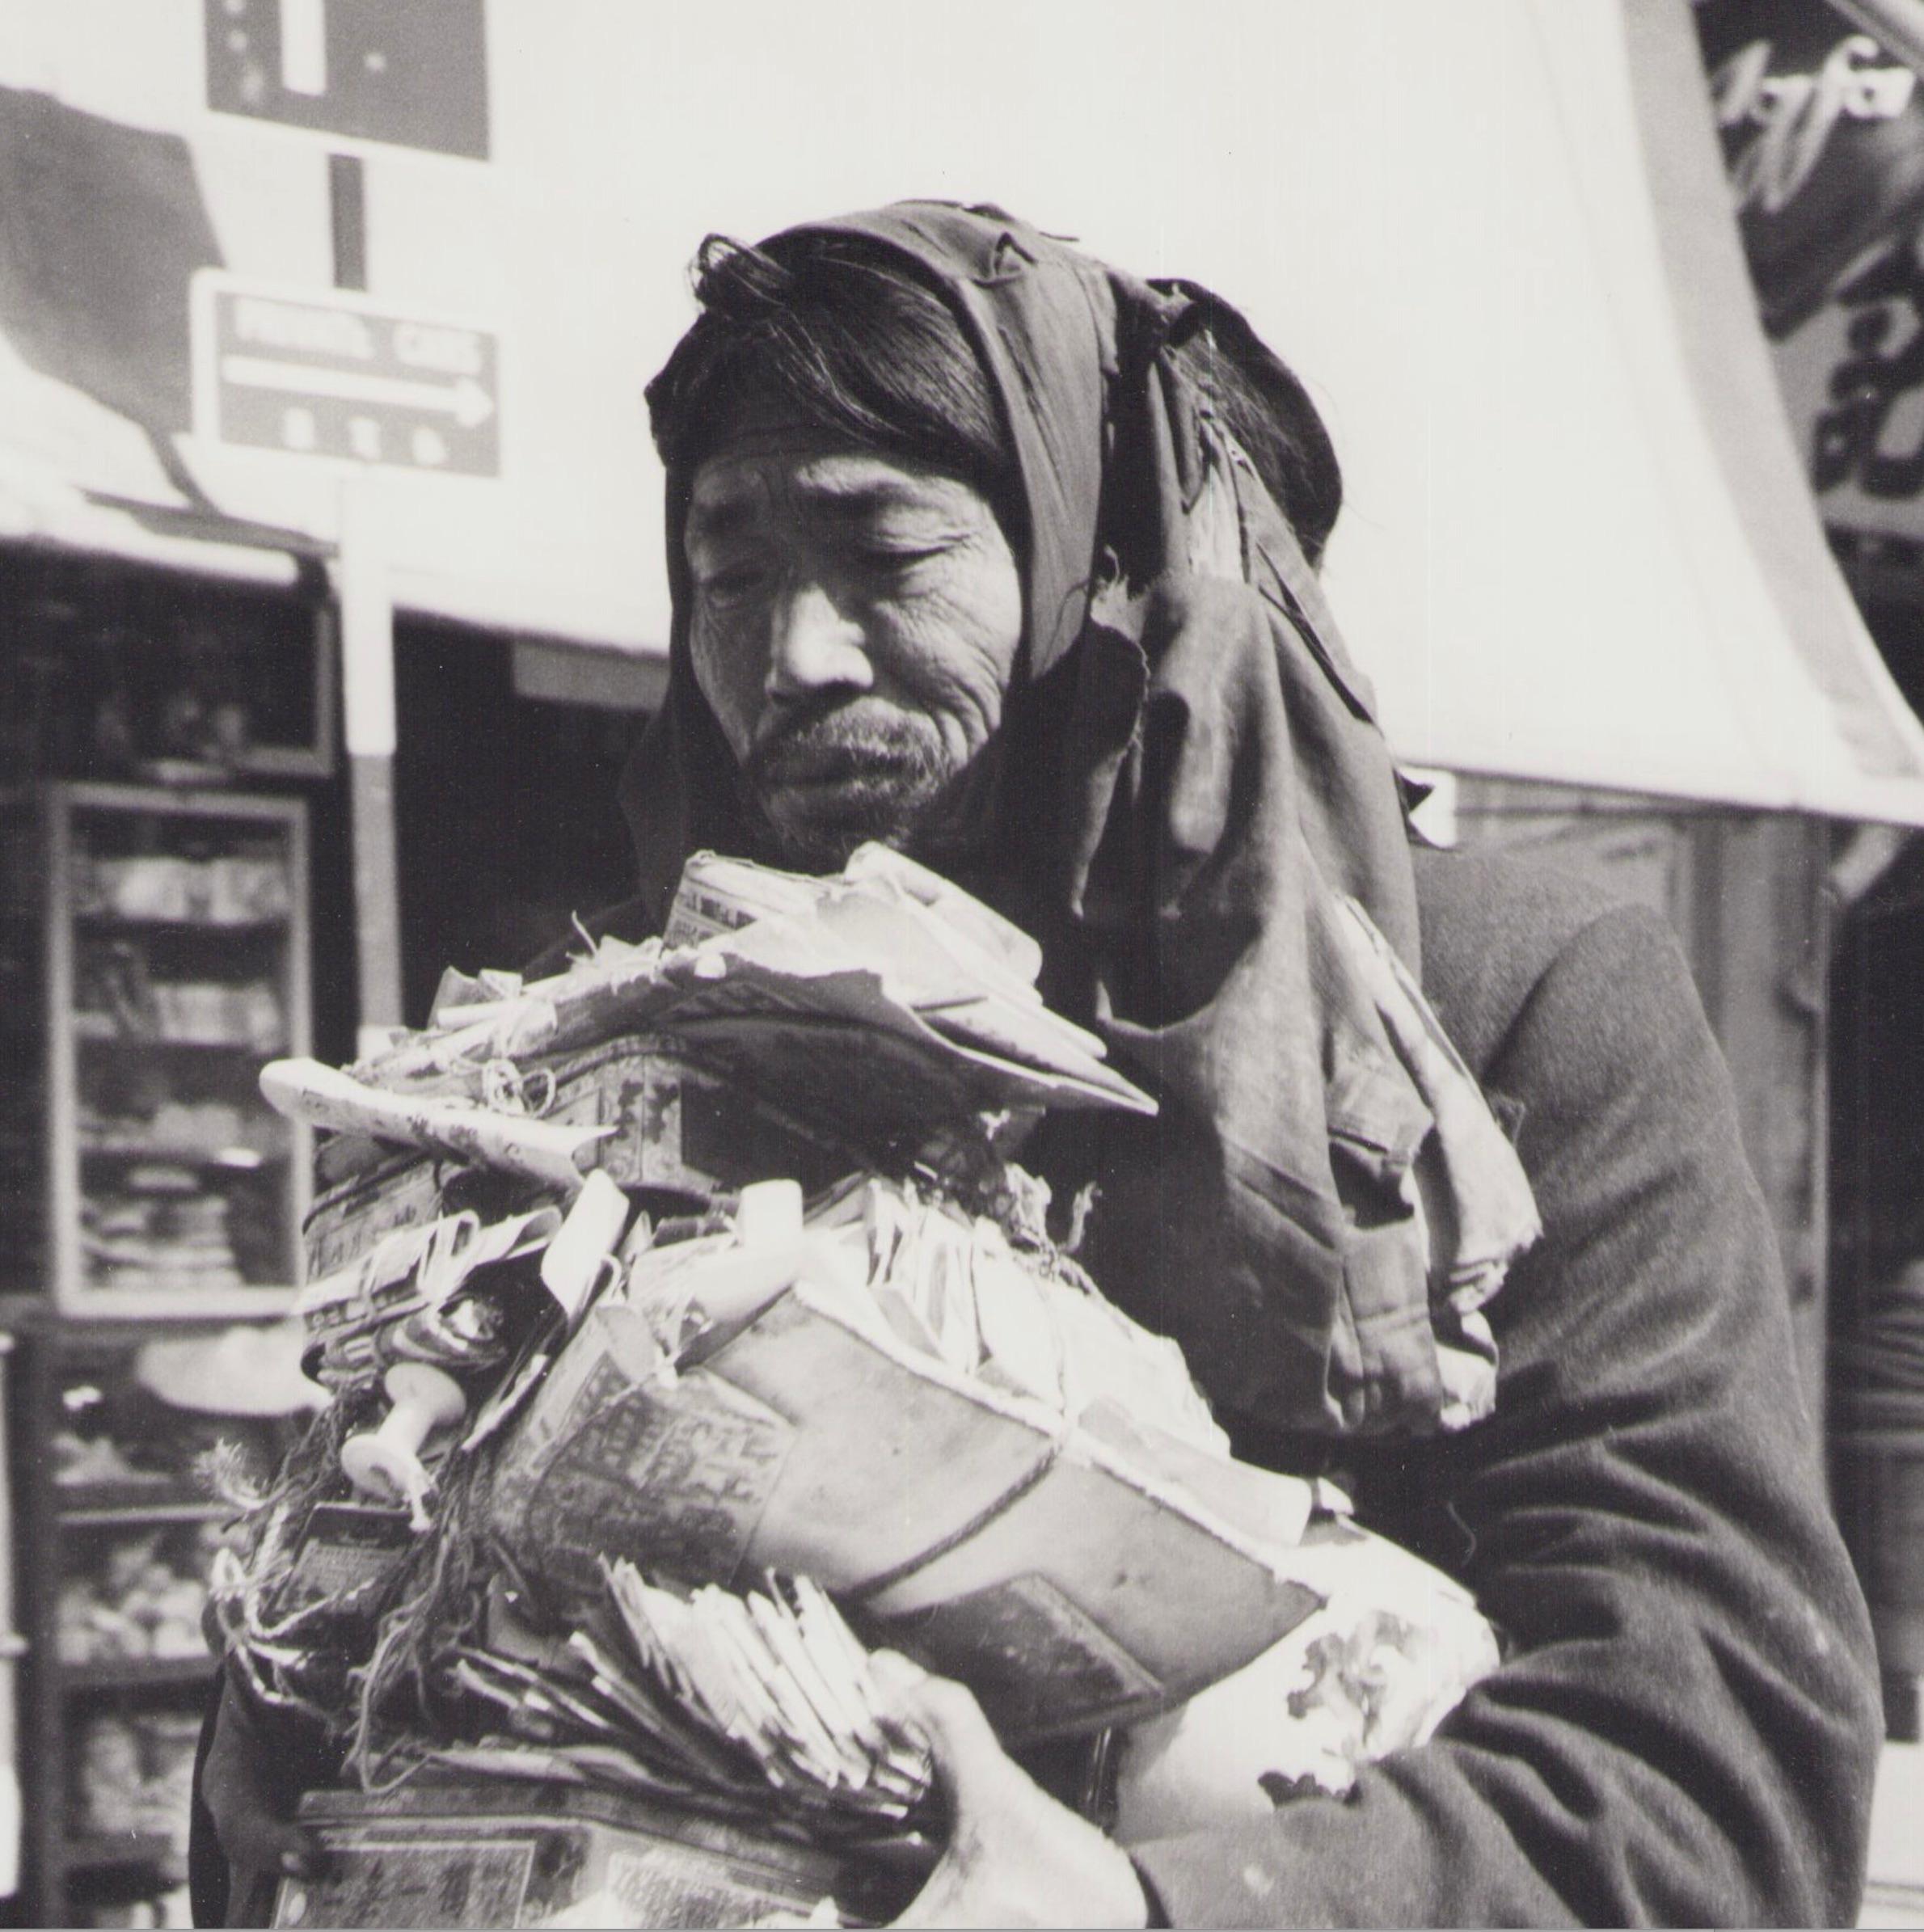 Hong Kong, Man, Collector, Black and White Photography, 1960s, 30 x 23, 8 cm - Gray Portrait Photograph by Hanna Seidel